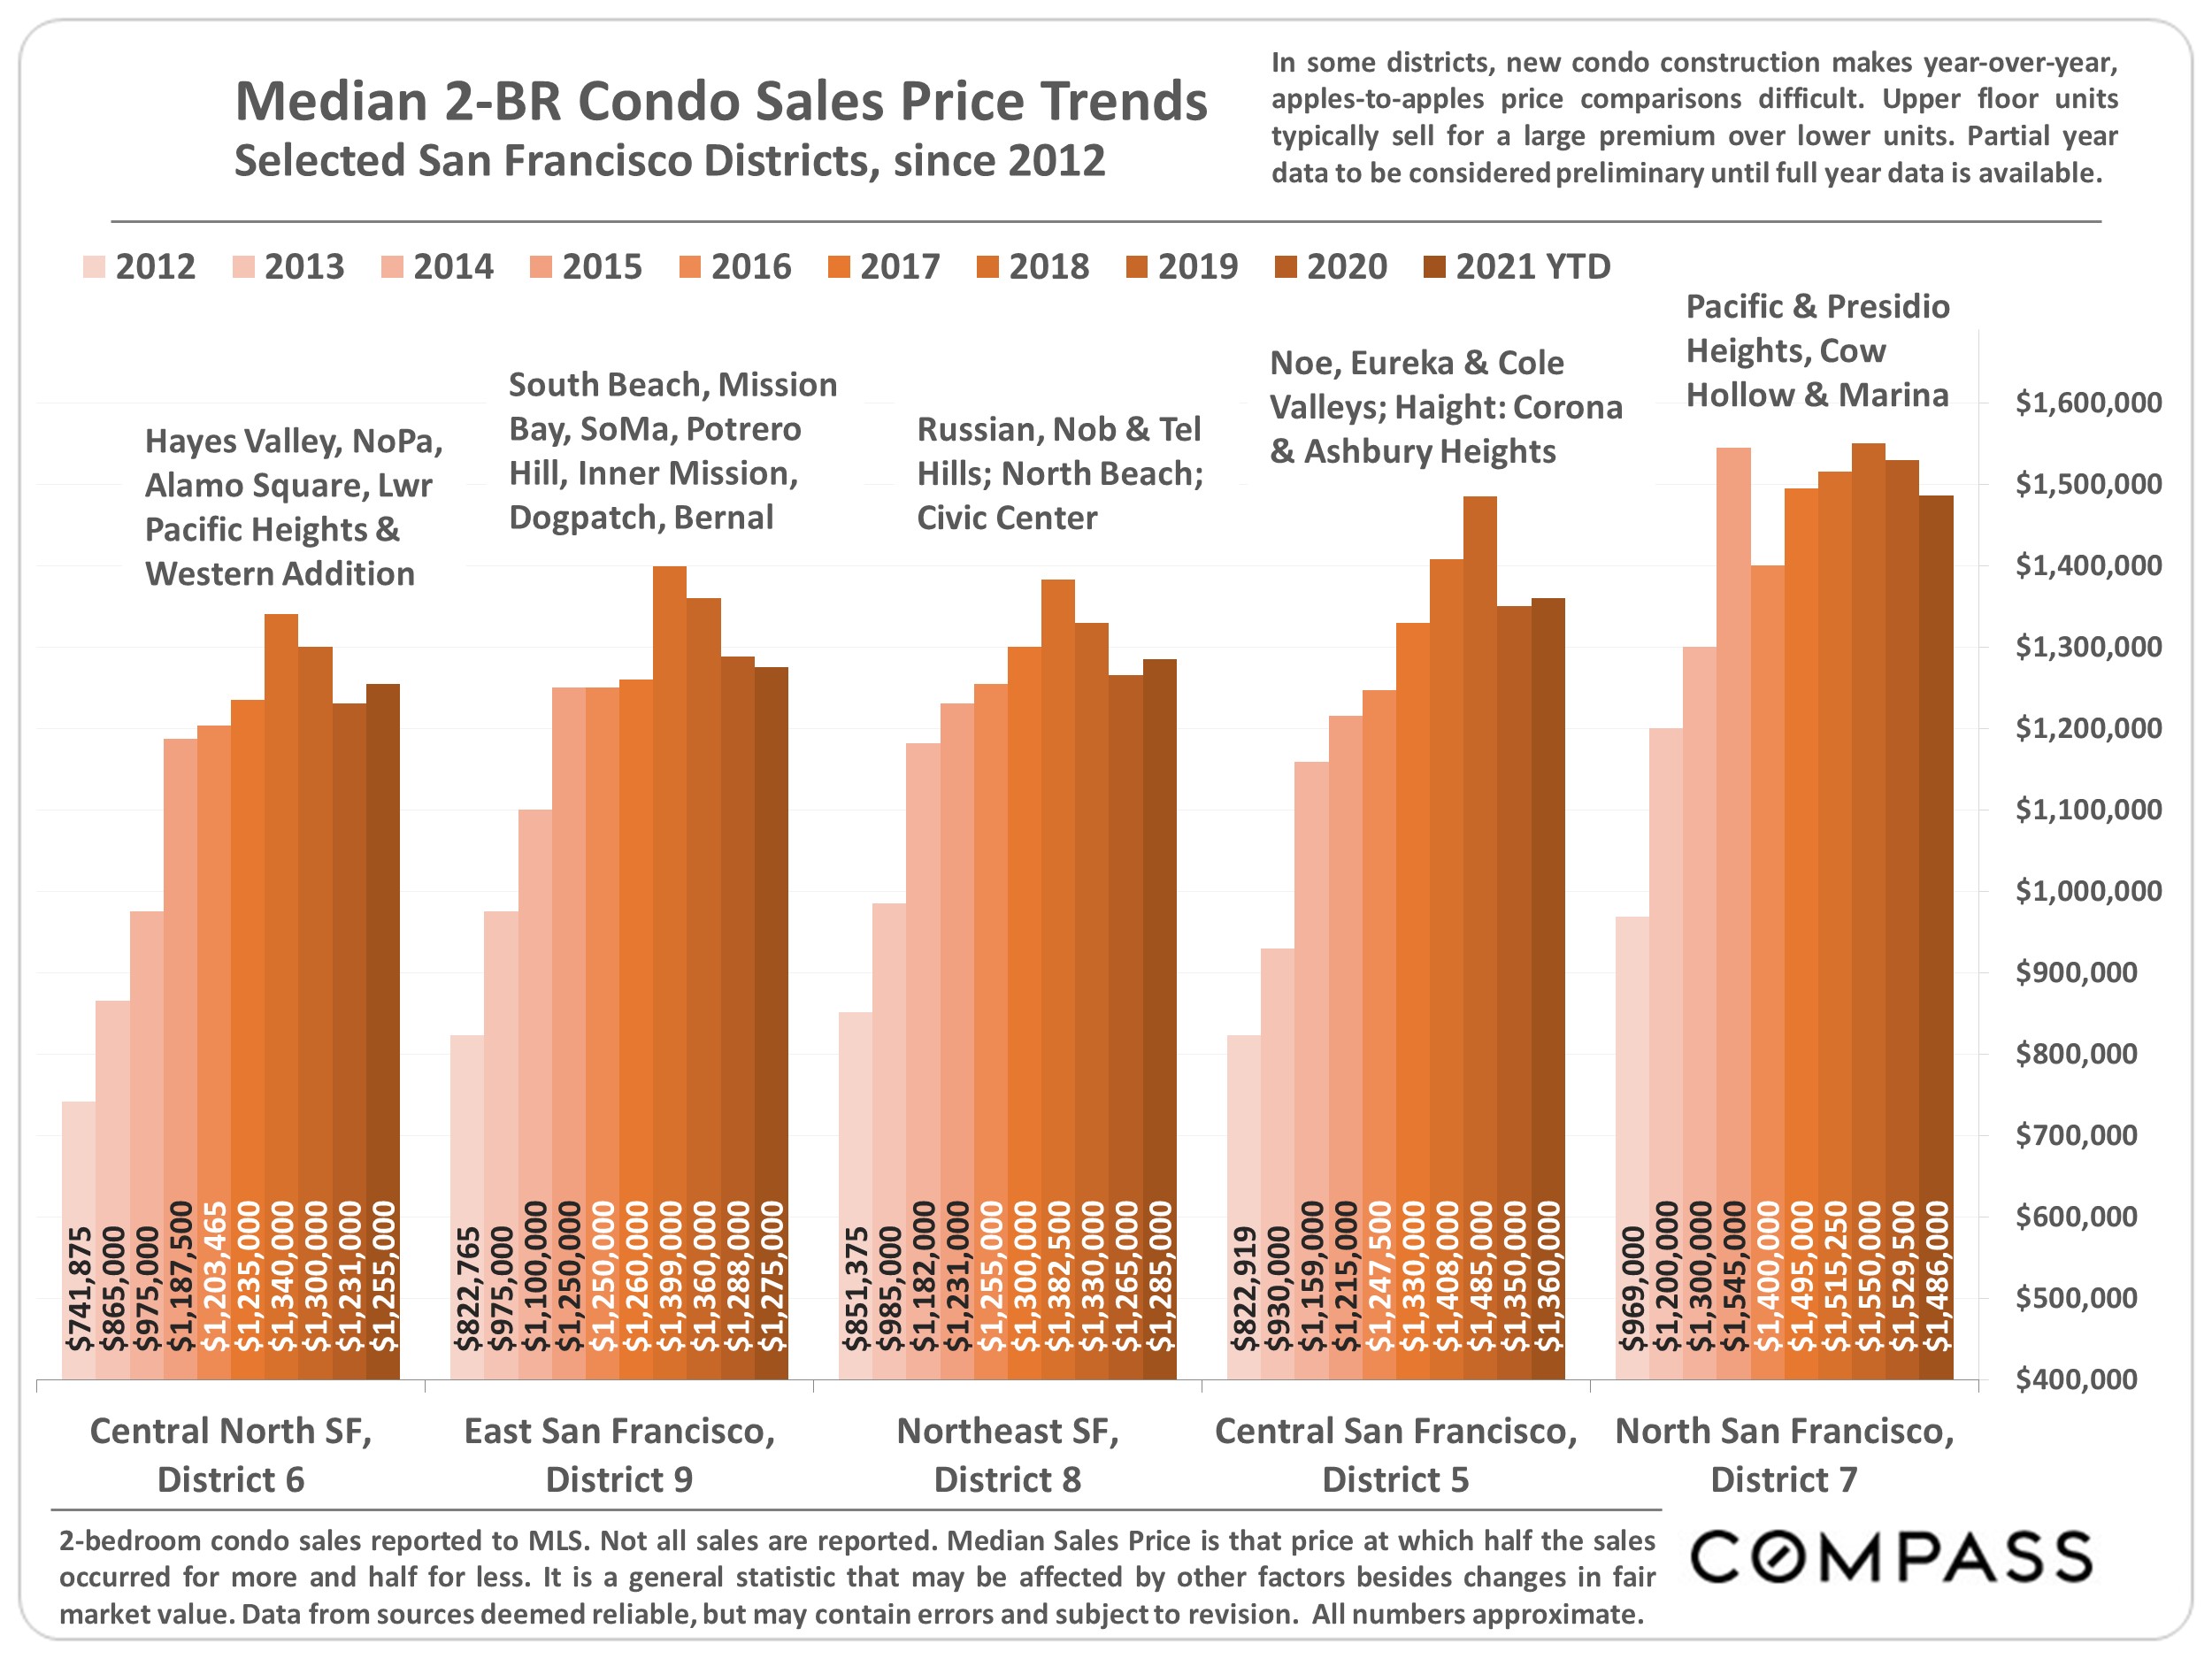 Chart showing the Median 2-BR Condo Sales Price Trends, Selected San Francisco Districts, since 2012. Central North SF and others.JPG